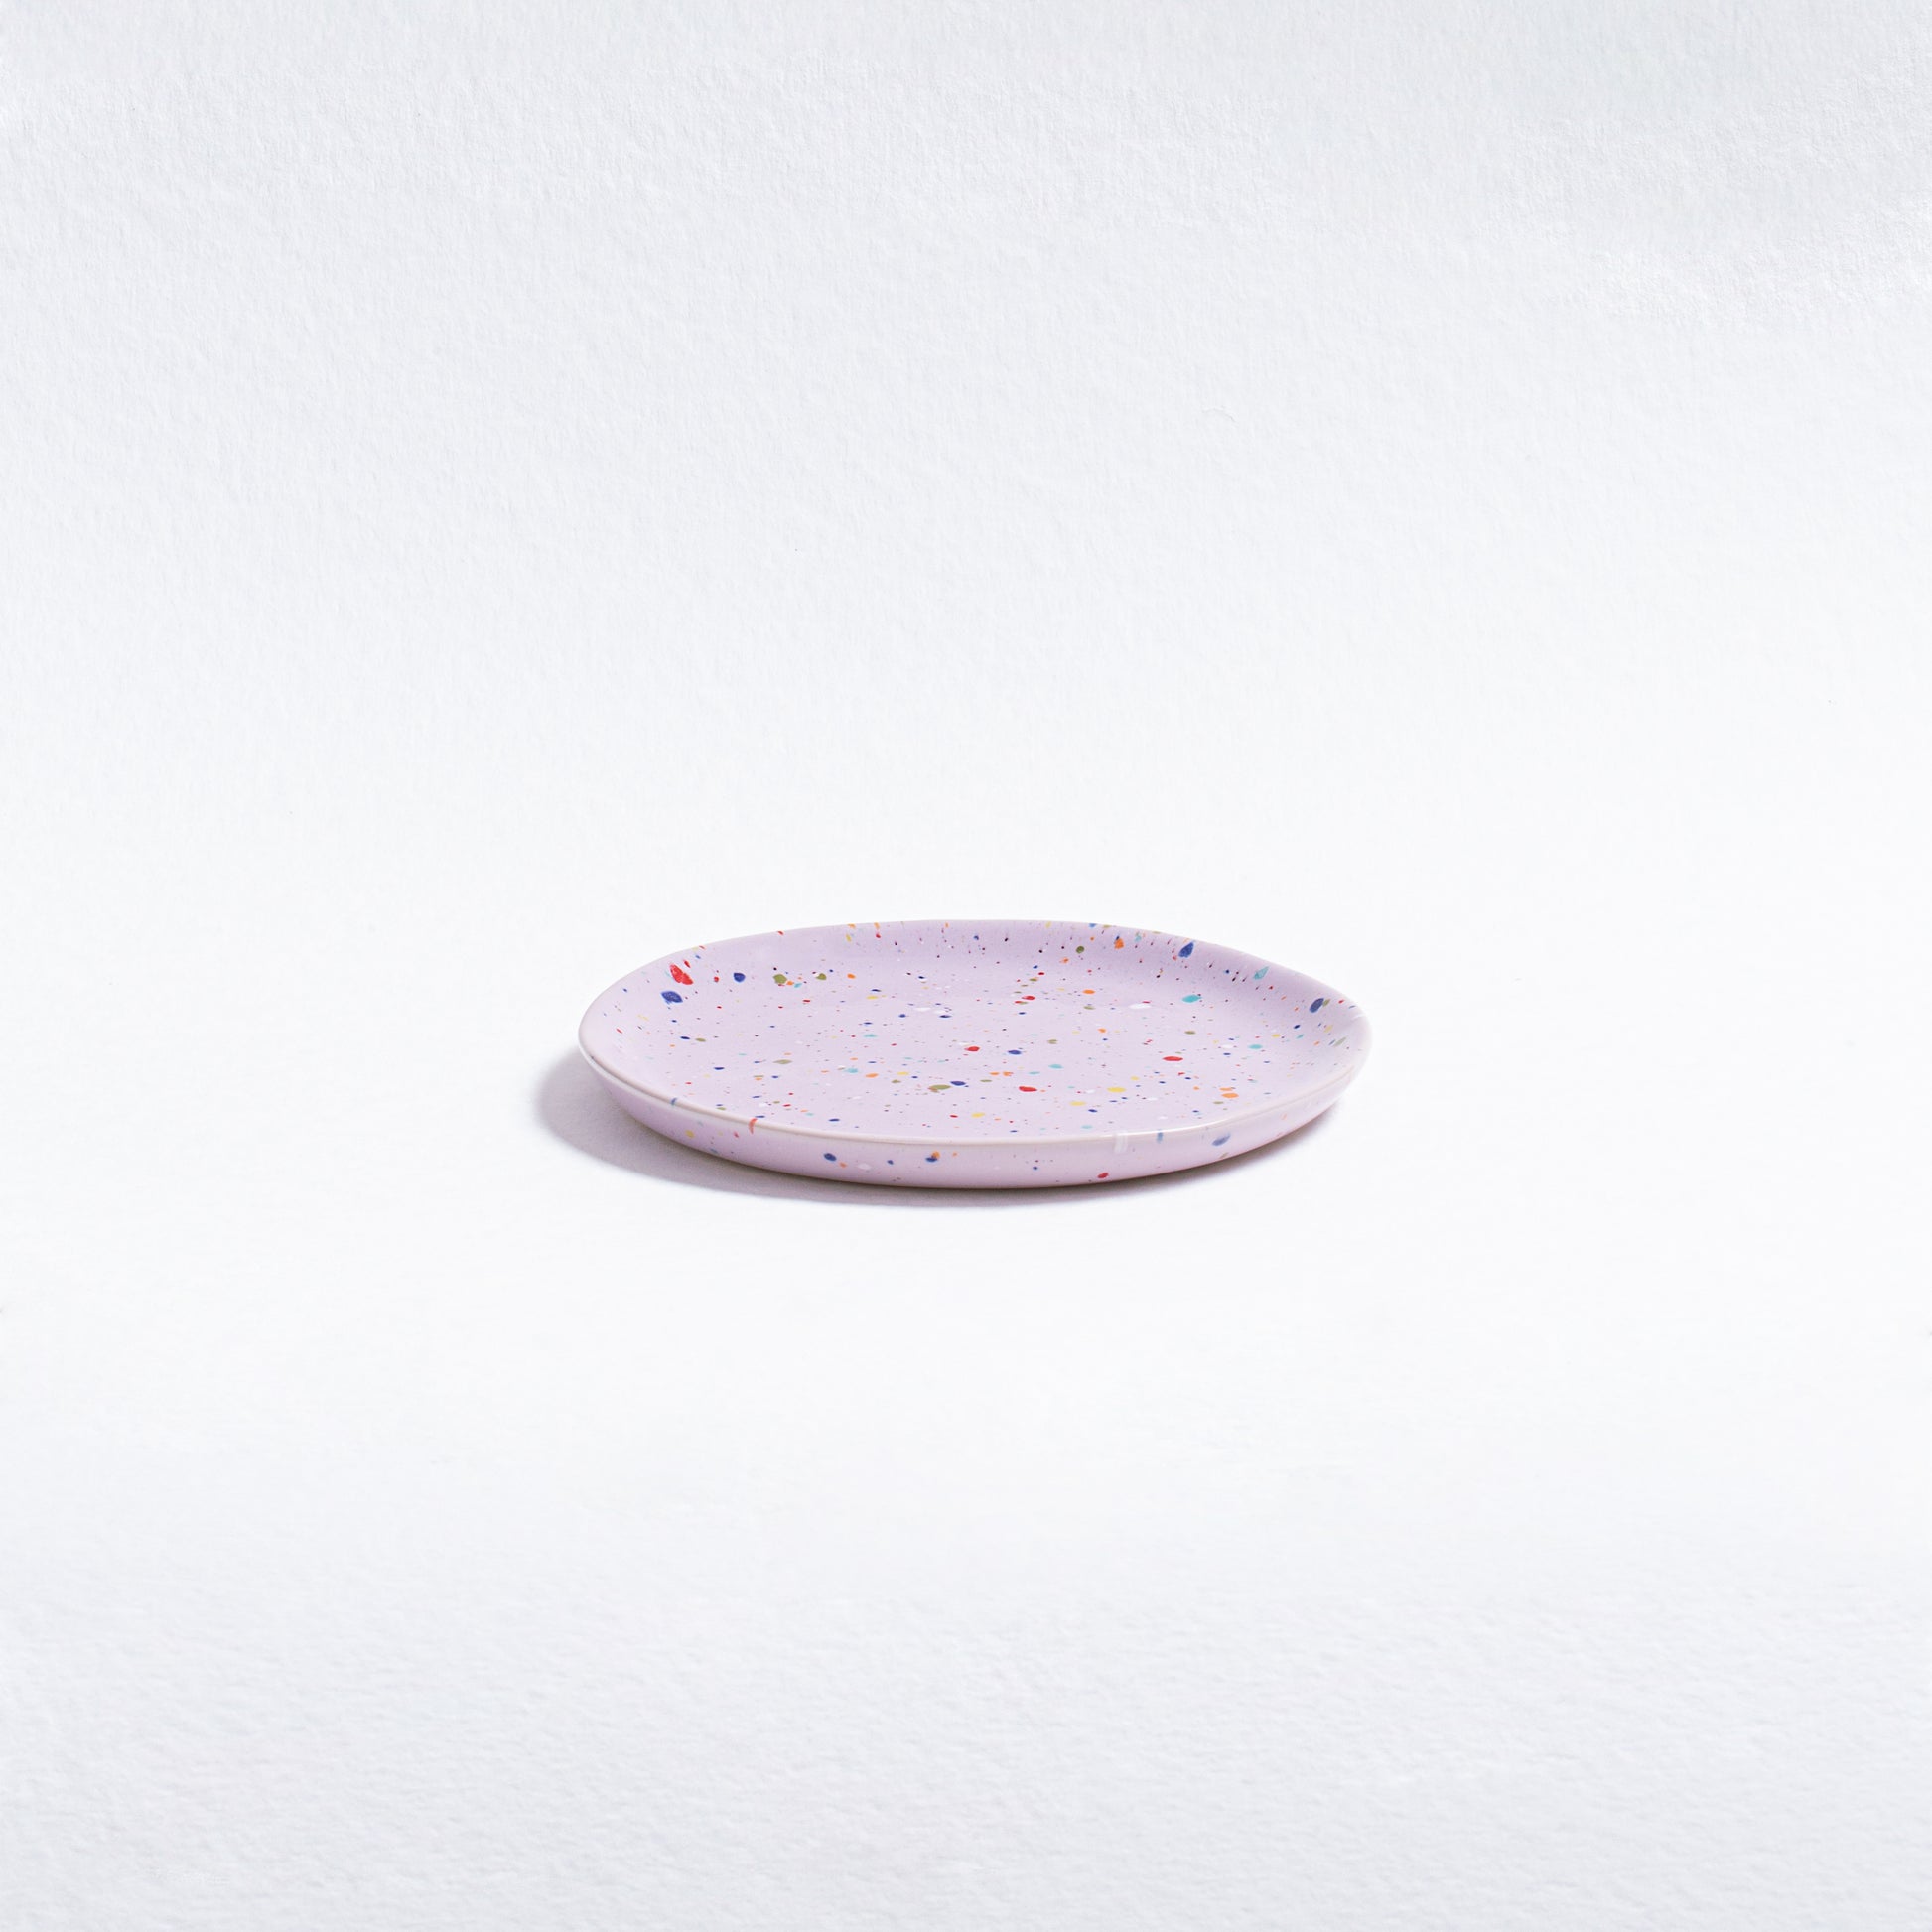  Bread Plate Lilac 17cm | Lilac Party Plate | Egg Back Home